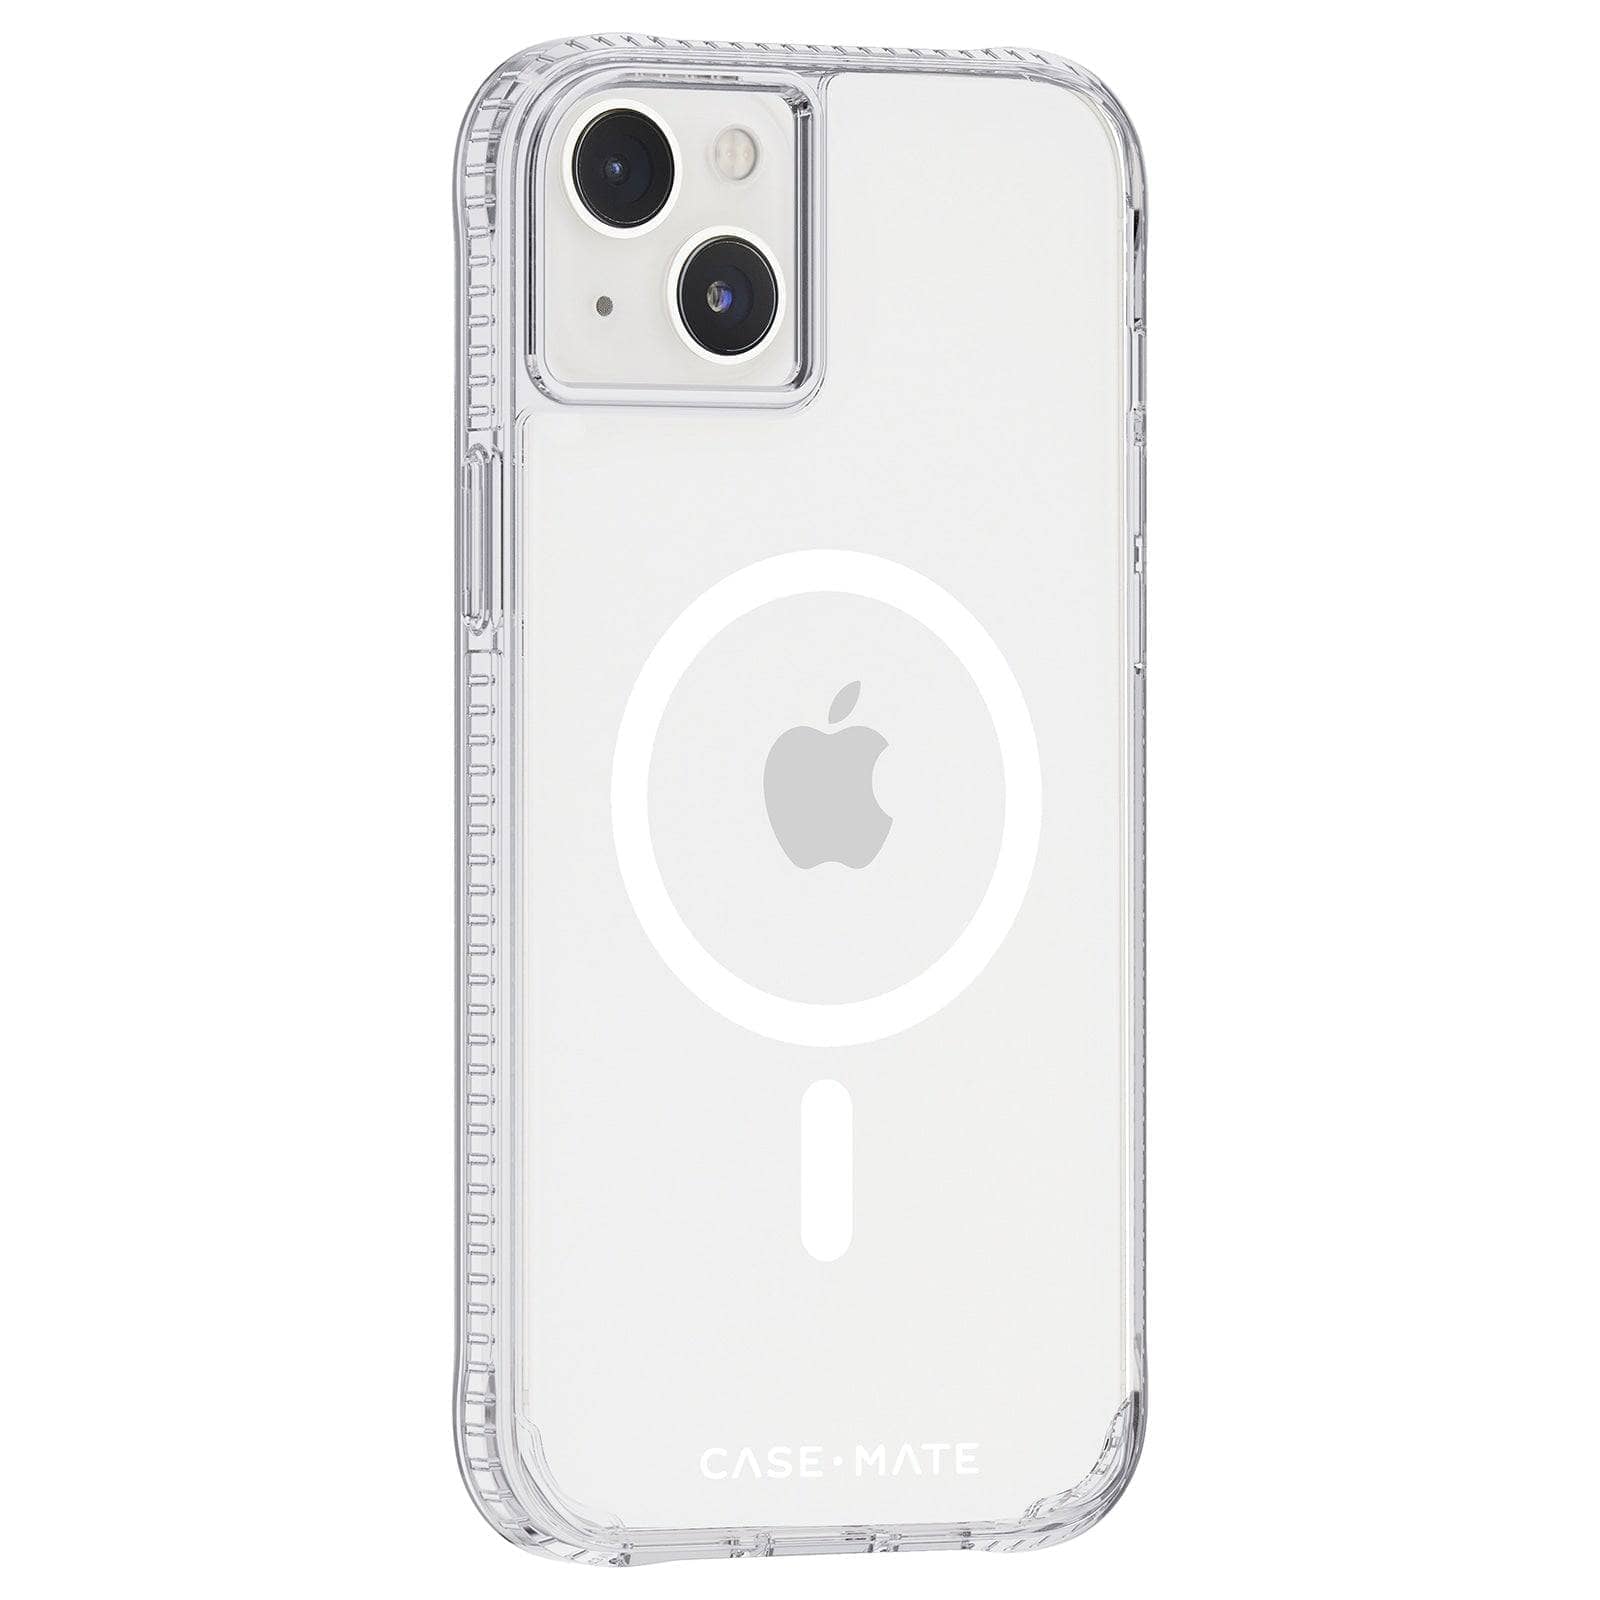 Case-Mate Tough Clear Plus Case - MagSafe - For iPhone 14 Plus (6.7")-Cases - Cases-CASE-MATE-www.PhoneGuy.com.au